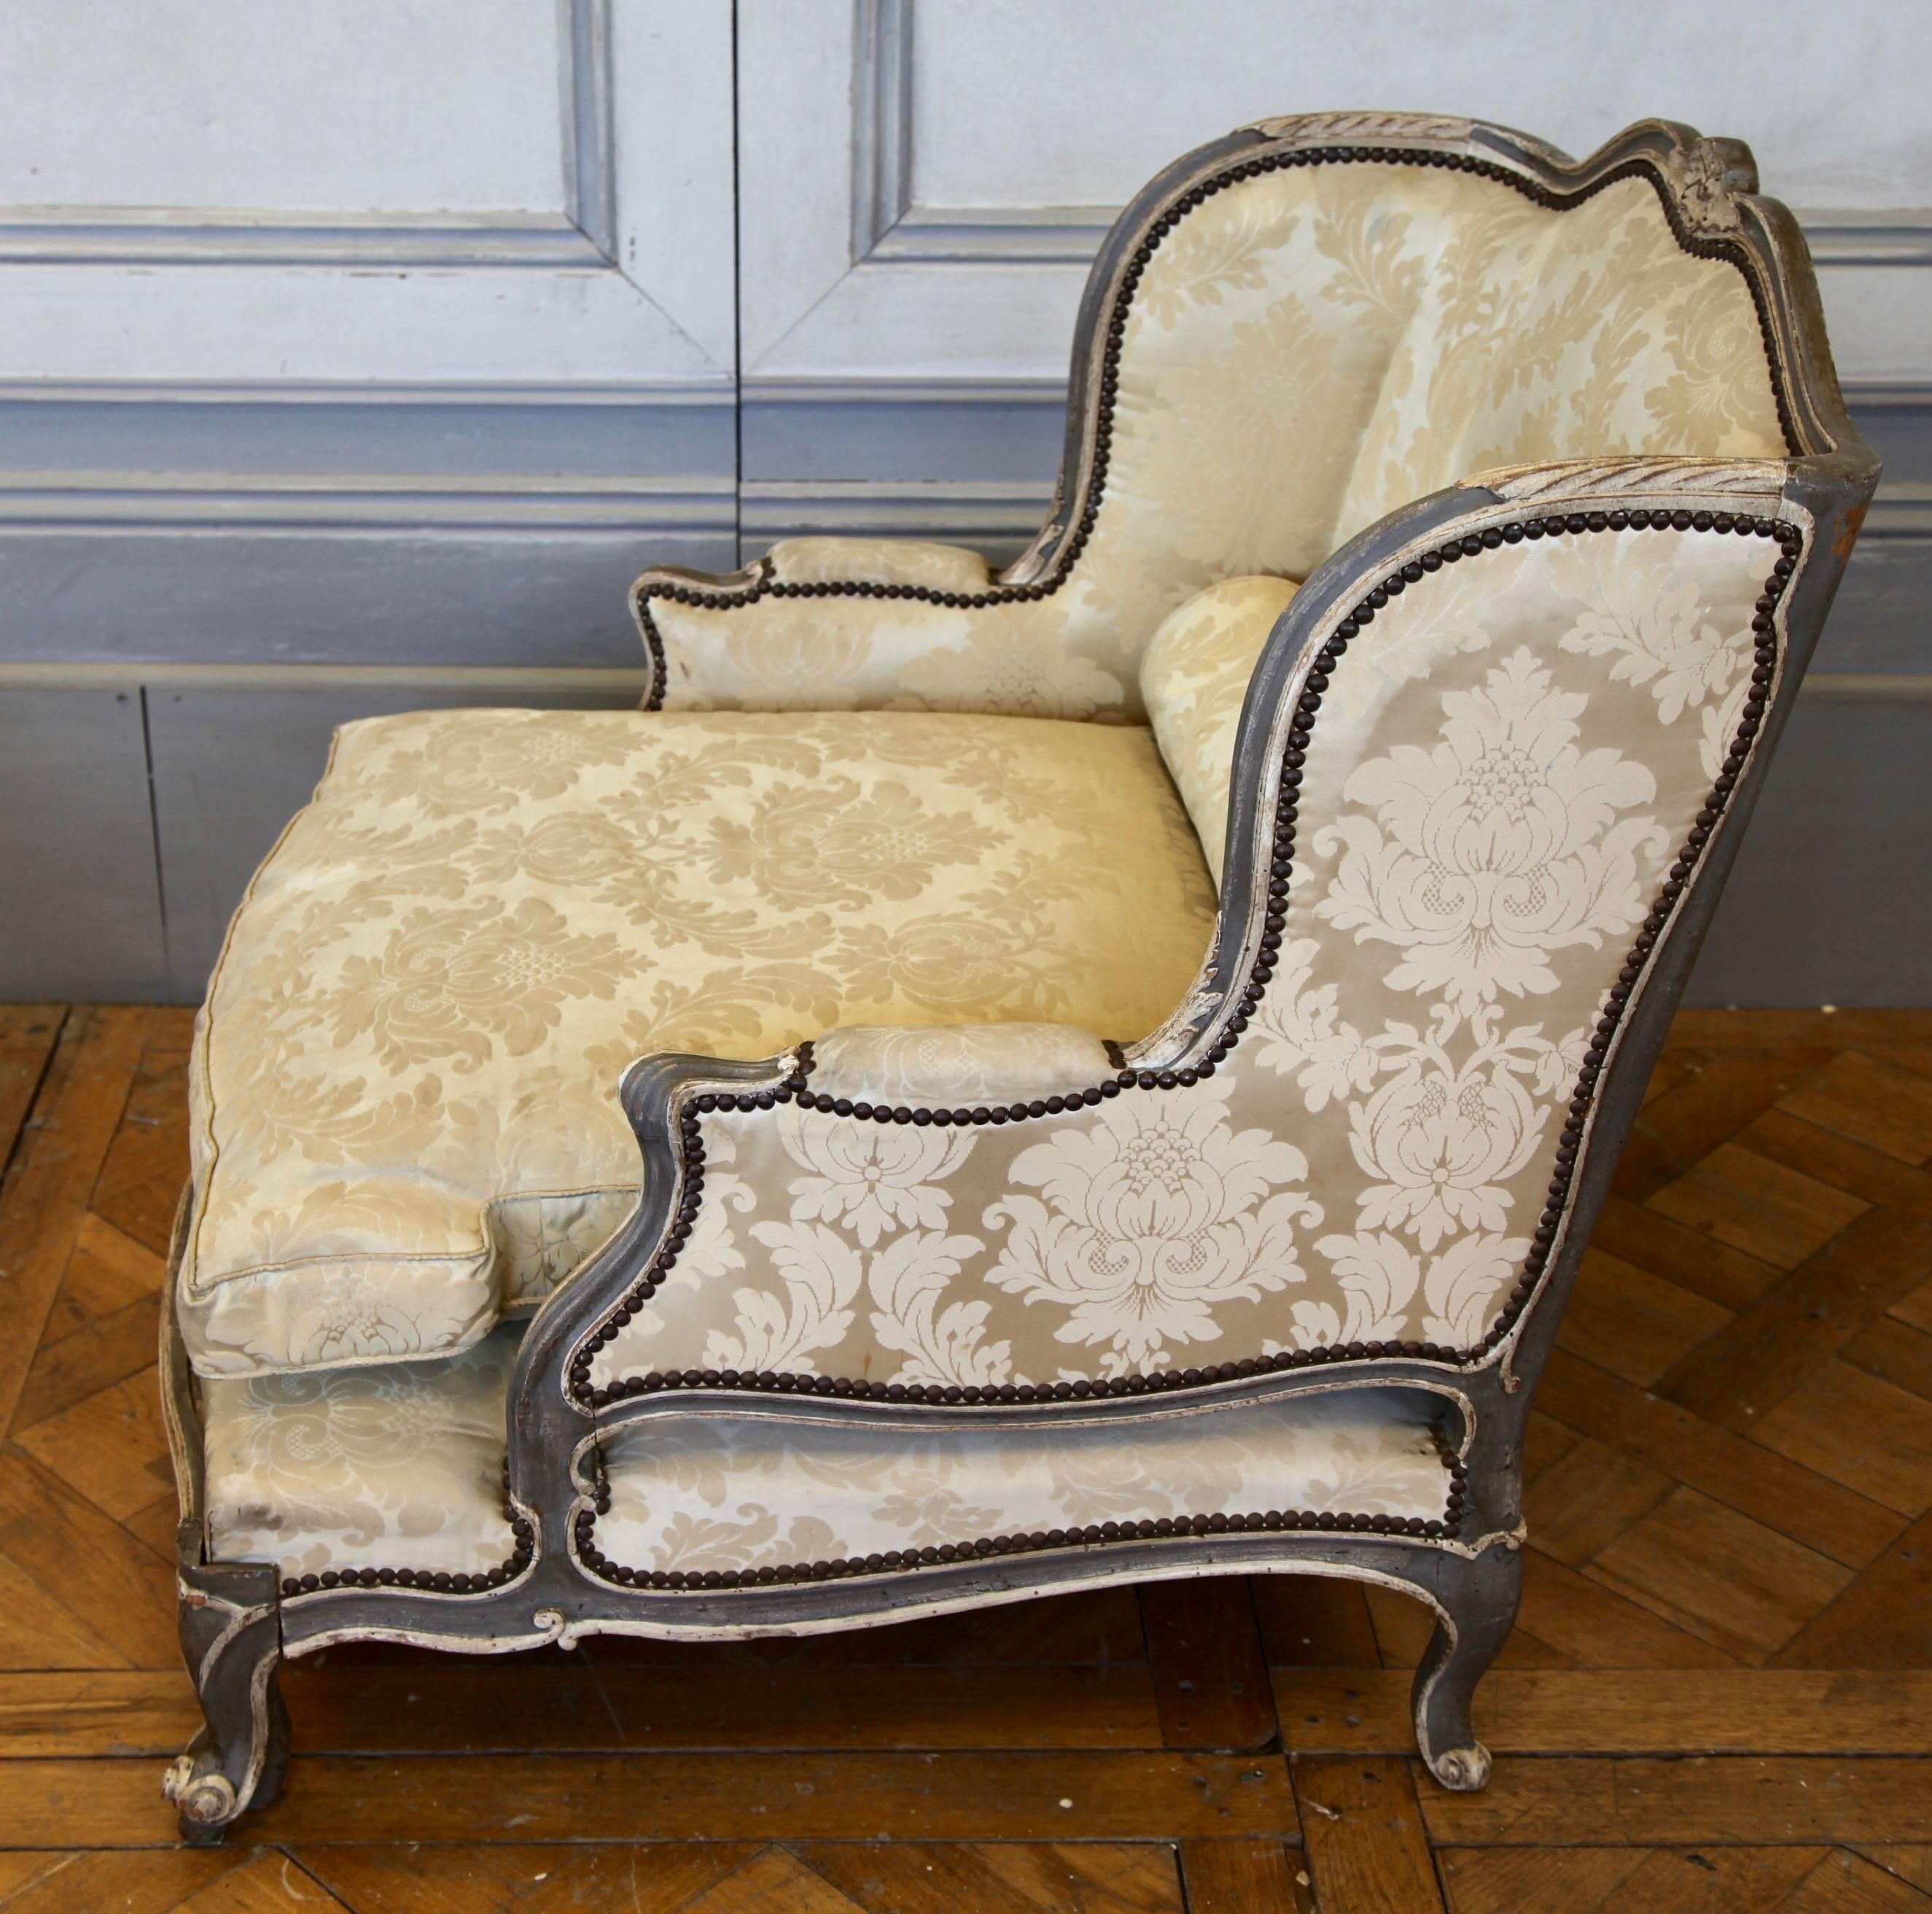 A Louis XV style Bergère chair with a built in section at the base which pulls out to become a duchesse when required. An unusual and innovative design for the period. Finished in the original two-tone paint colors of grey and ecru as seen in the